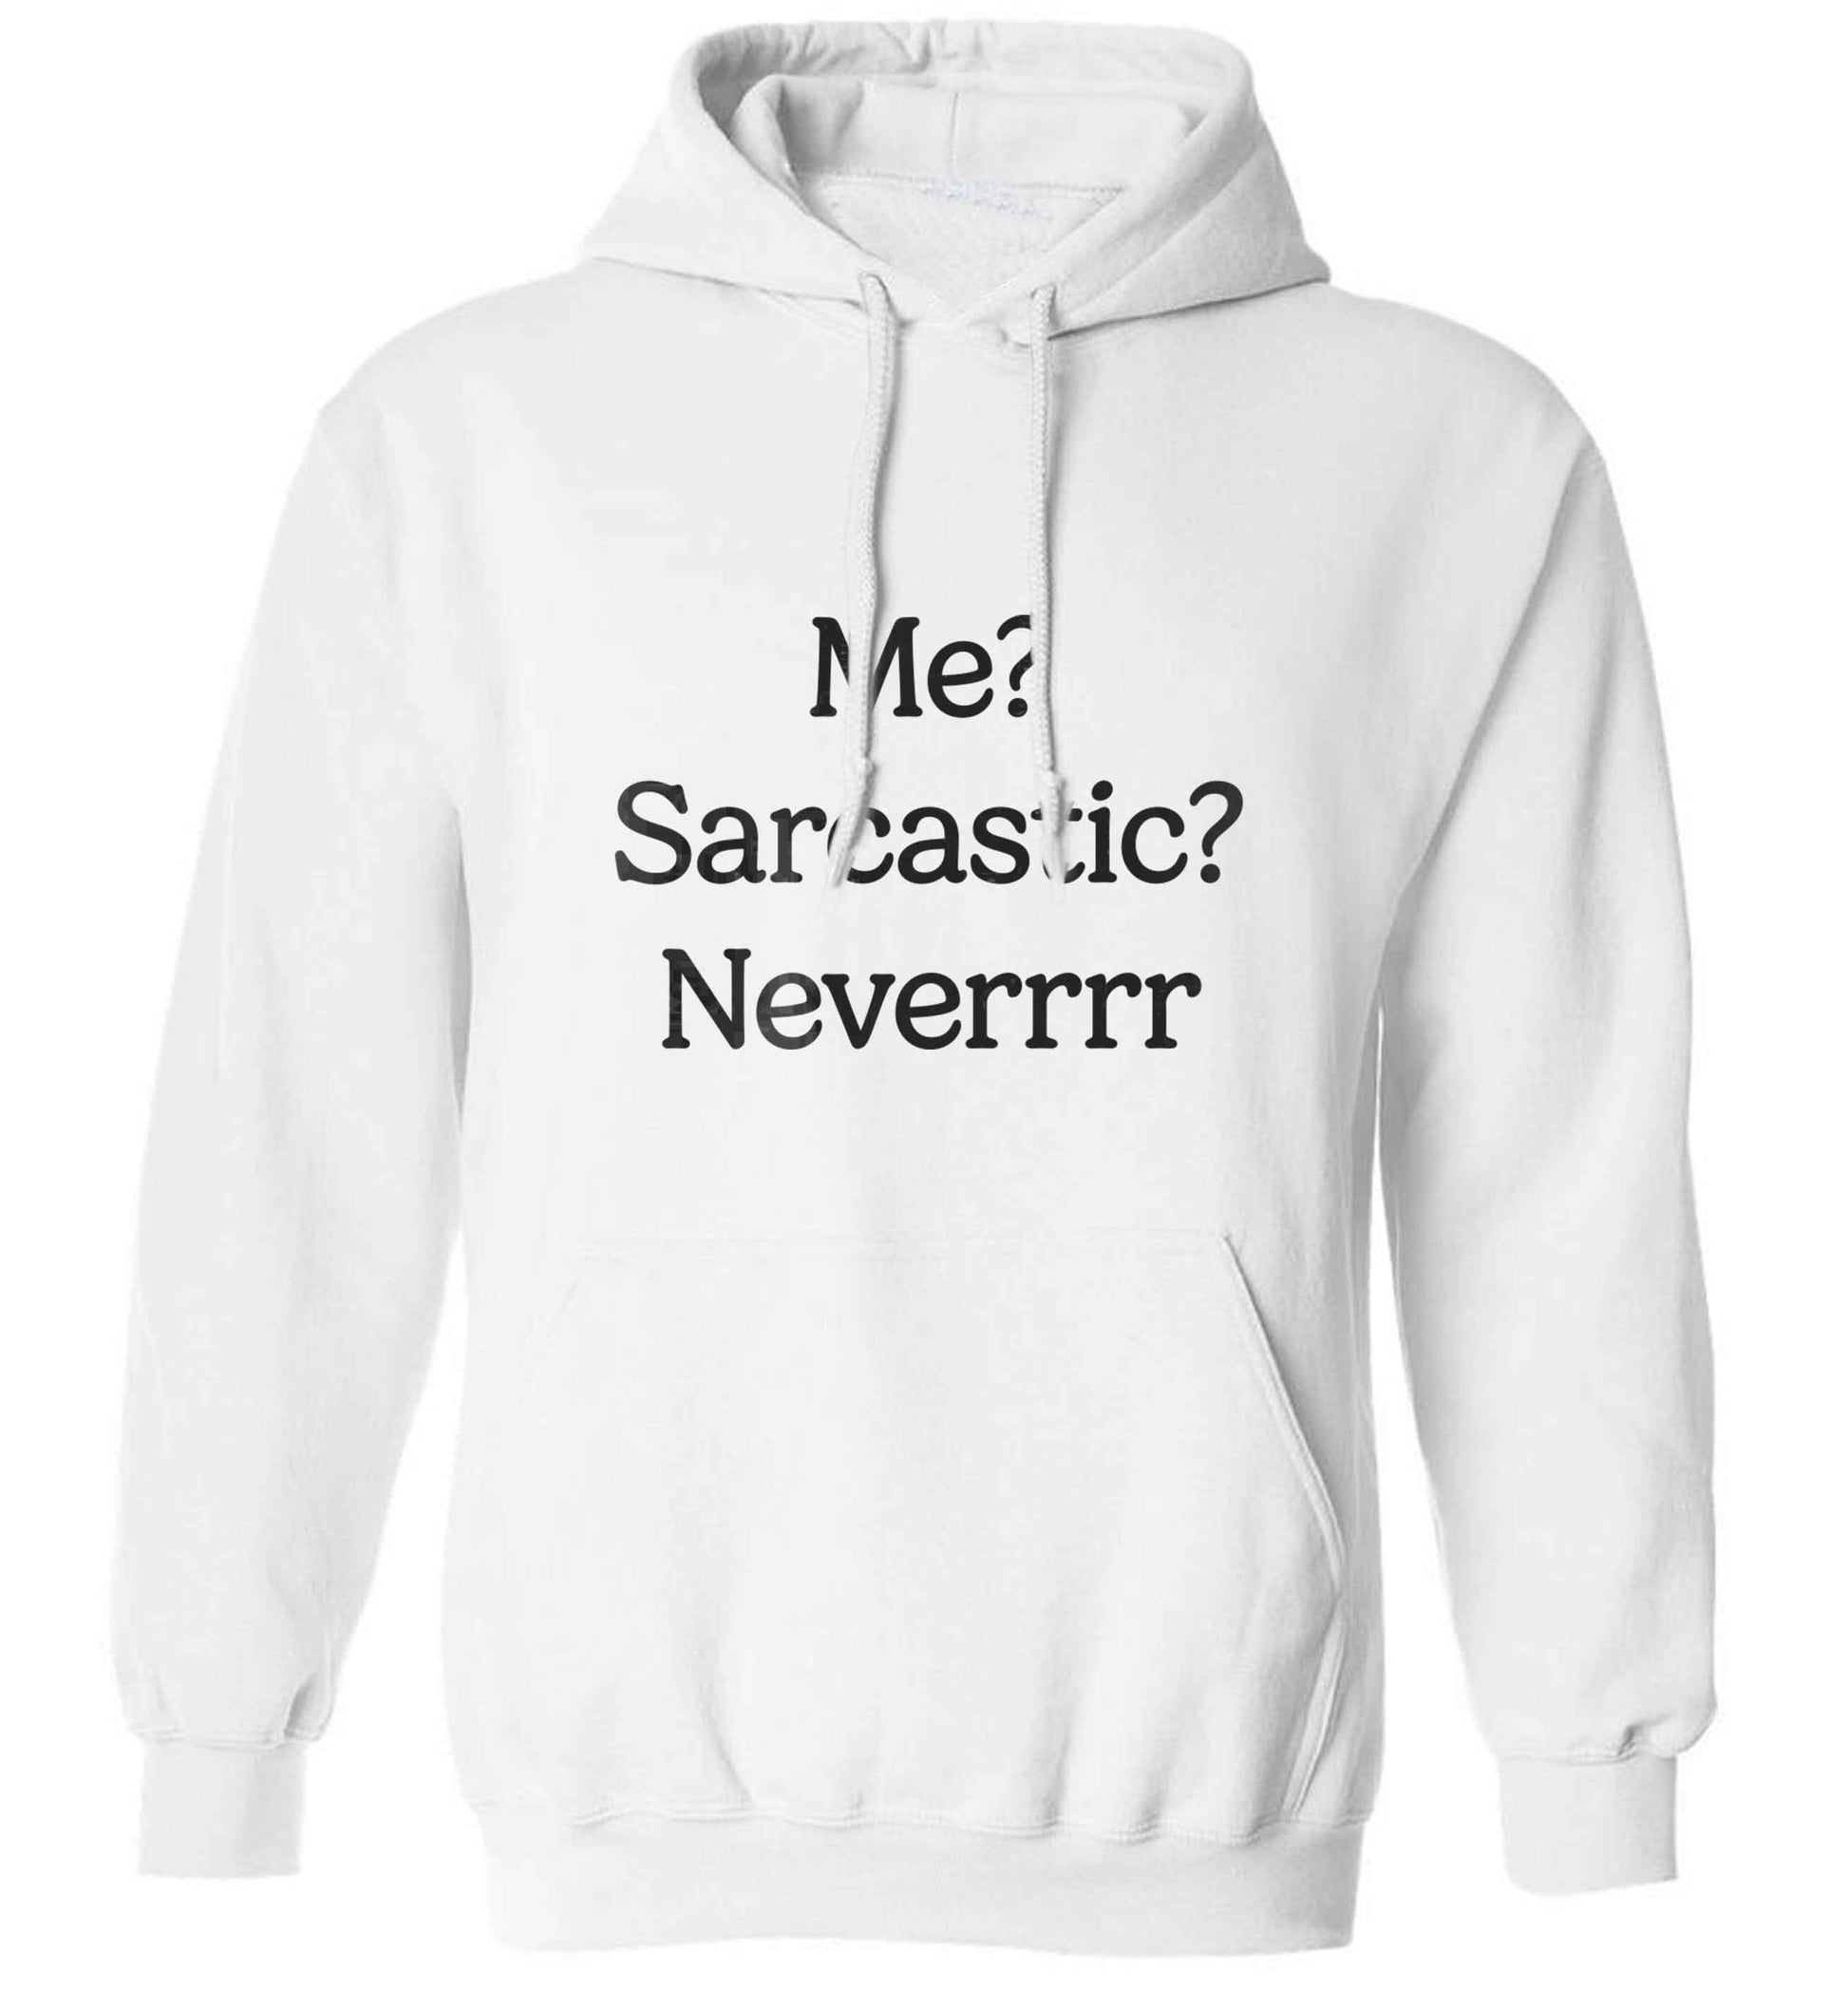 Me? sarcastic? never adults unisex white hoodie 2XL